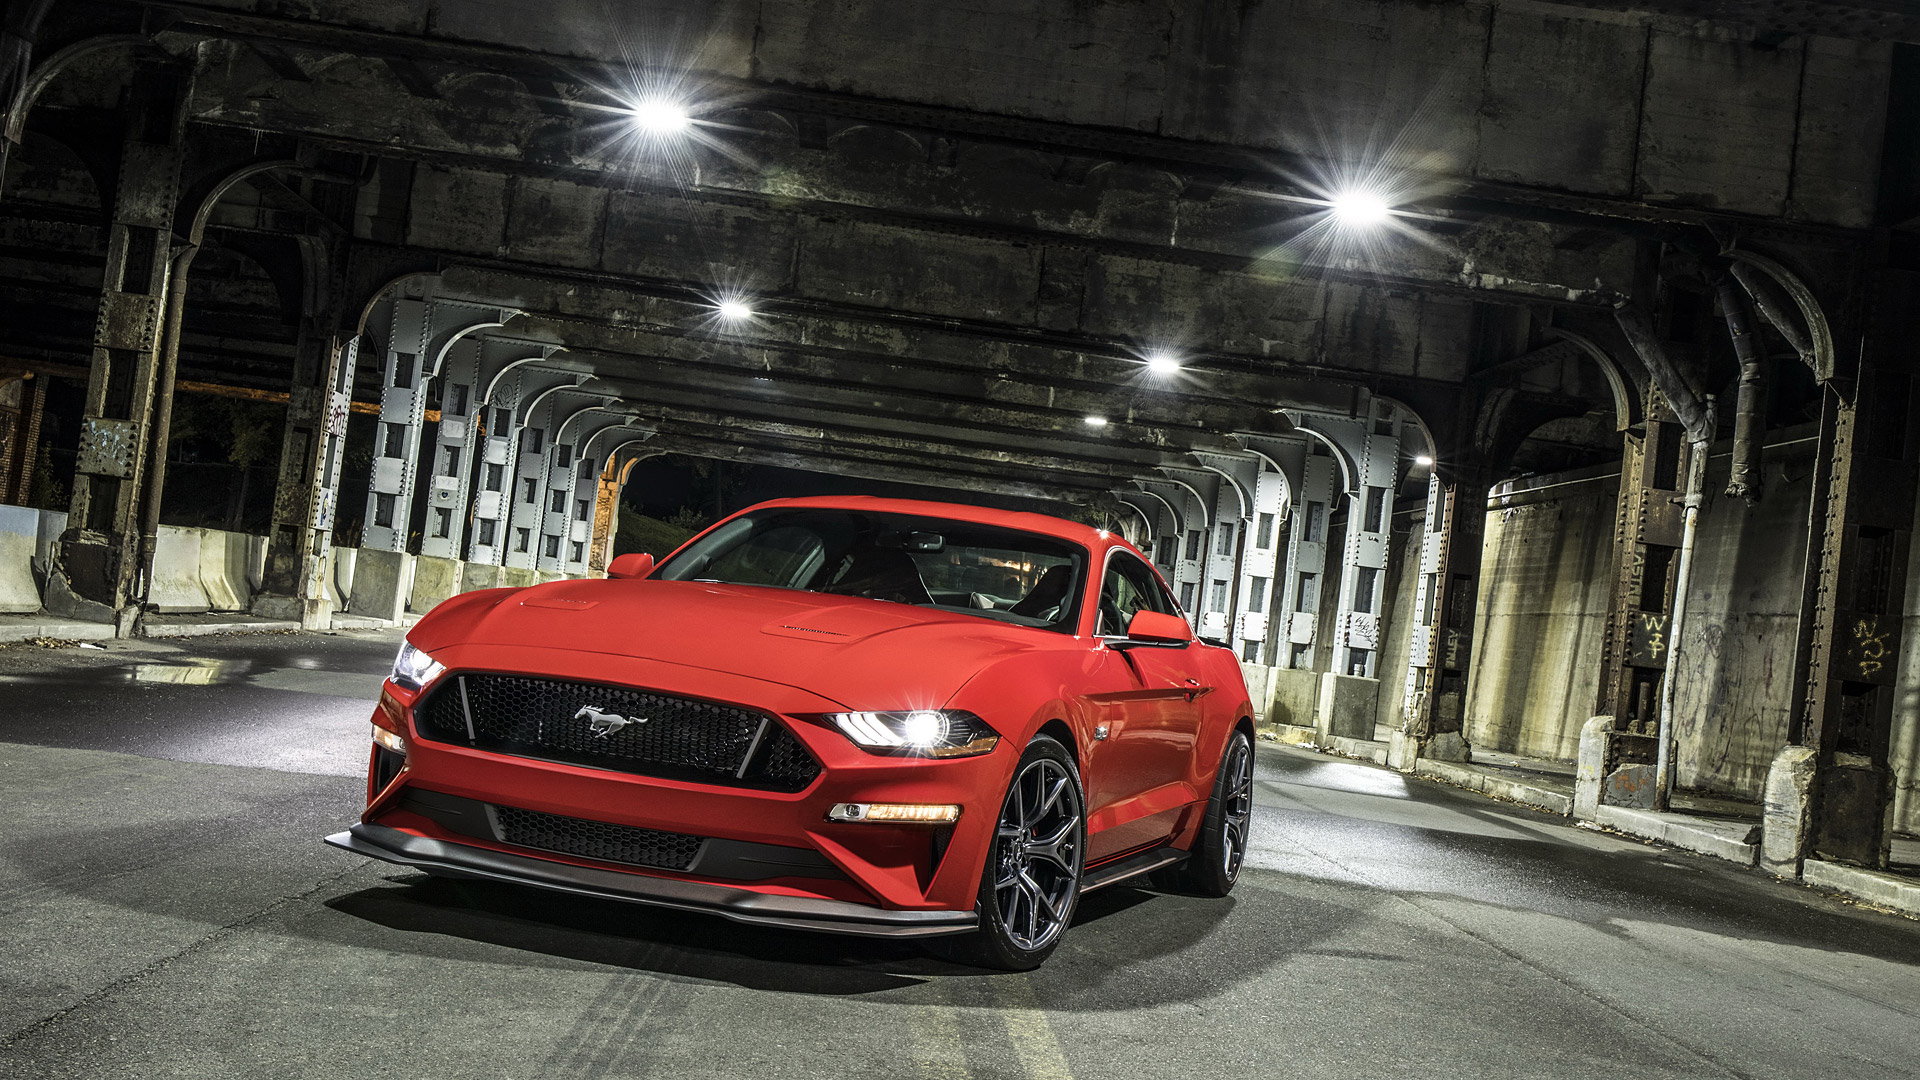 Review of 2018 mustang gt